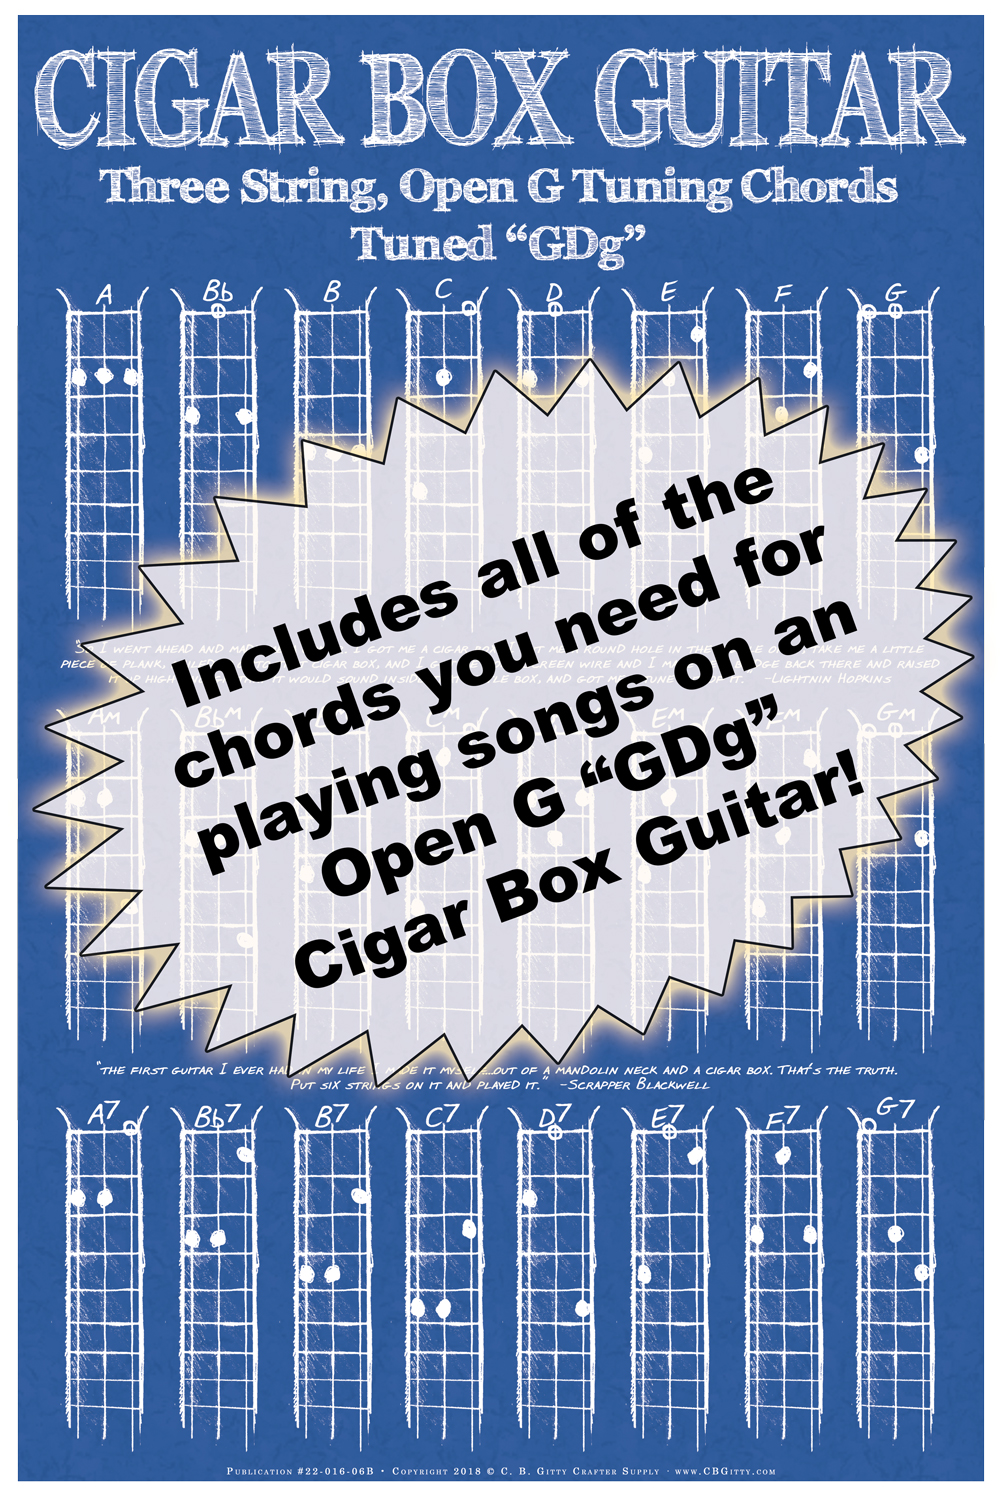 Blueprint-style 3-string Open G Chord Poster for Cigar Box Guitar